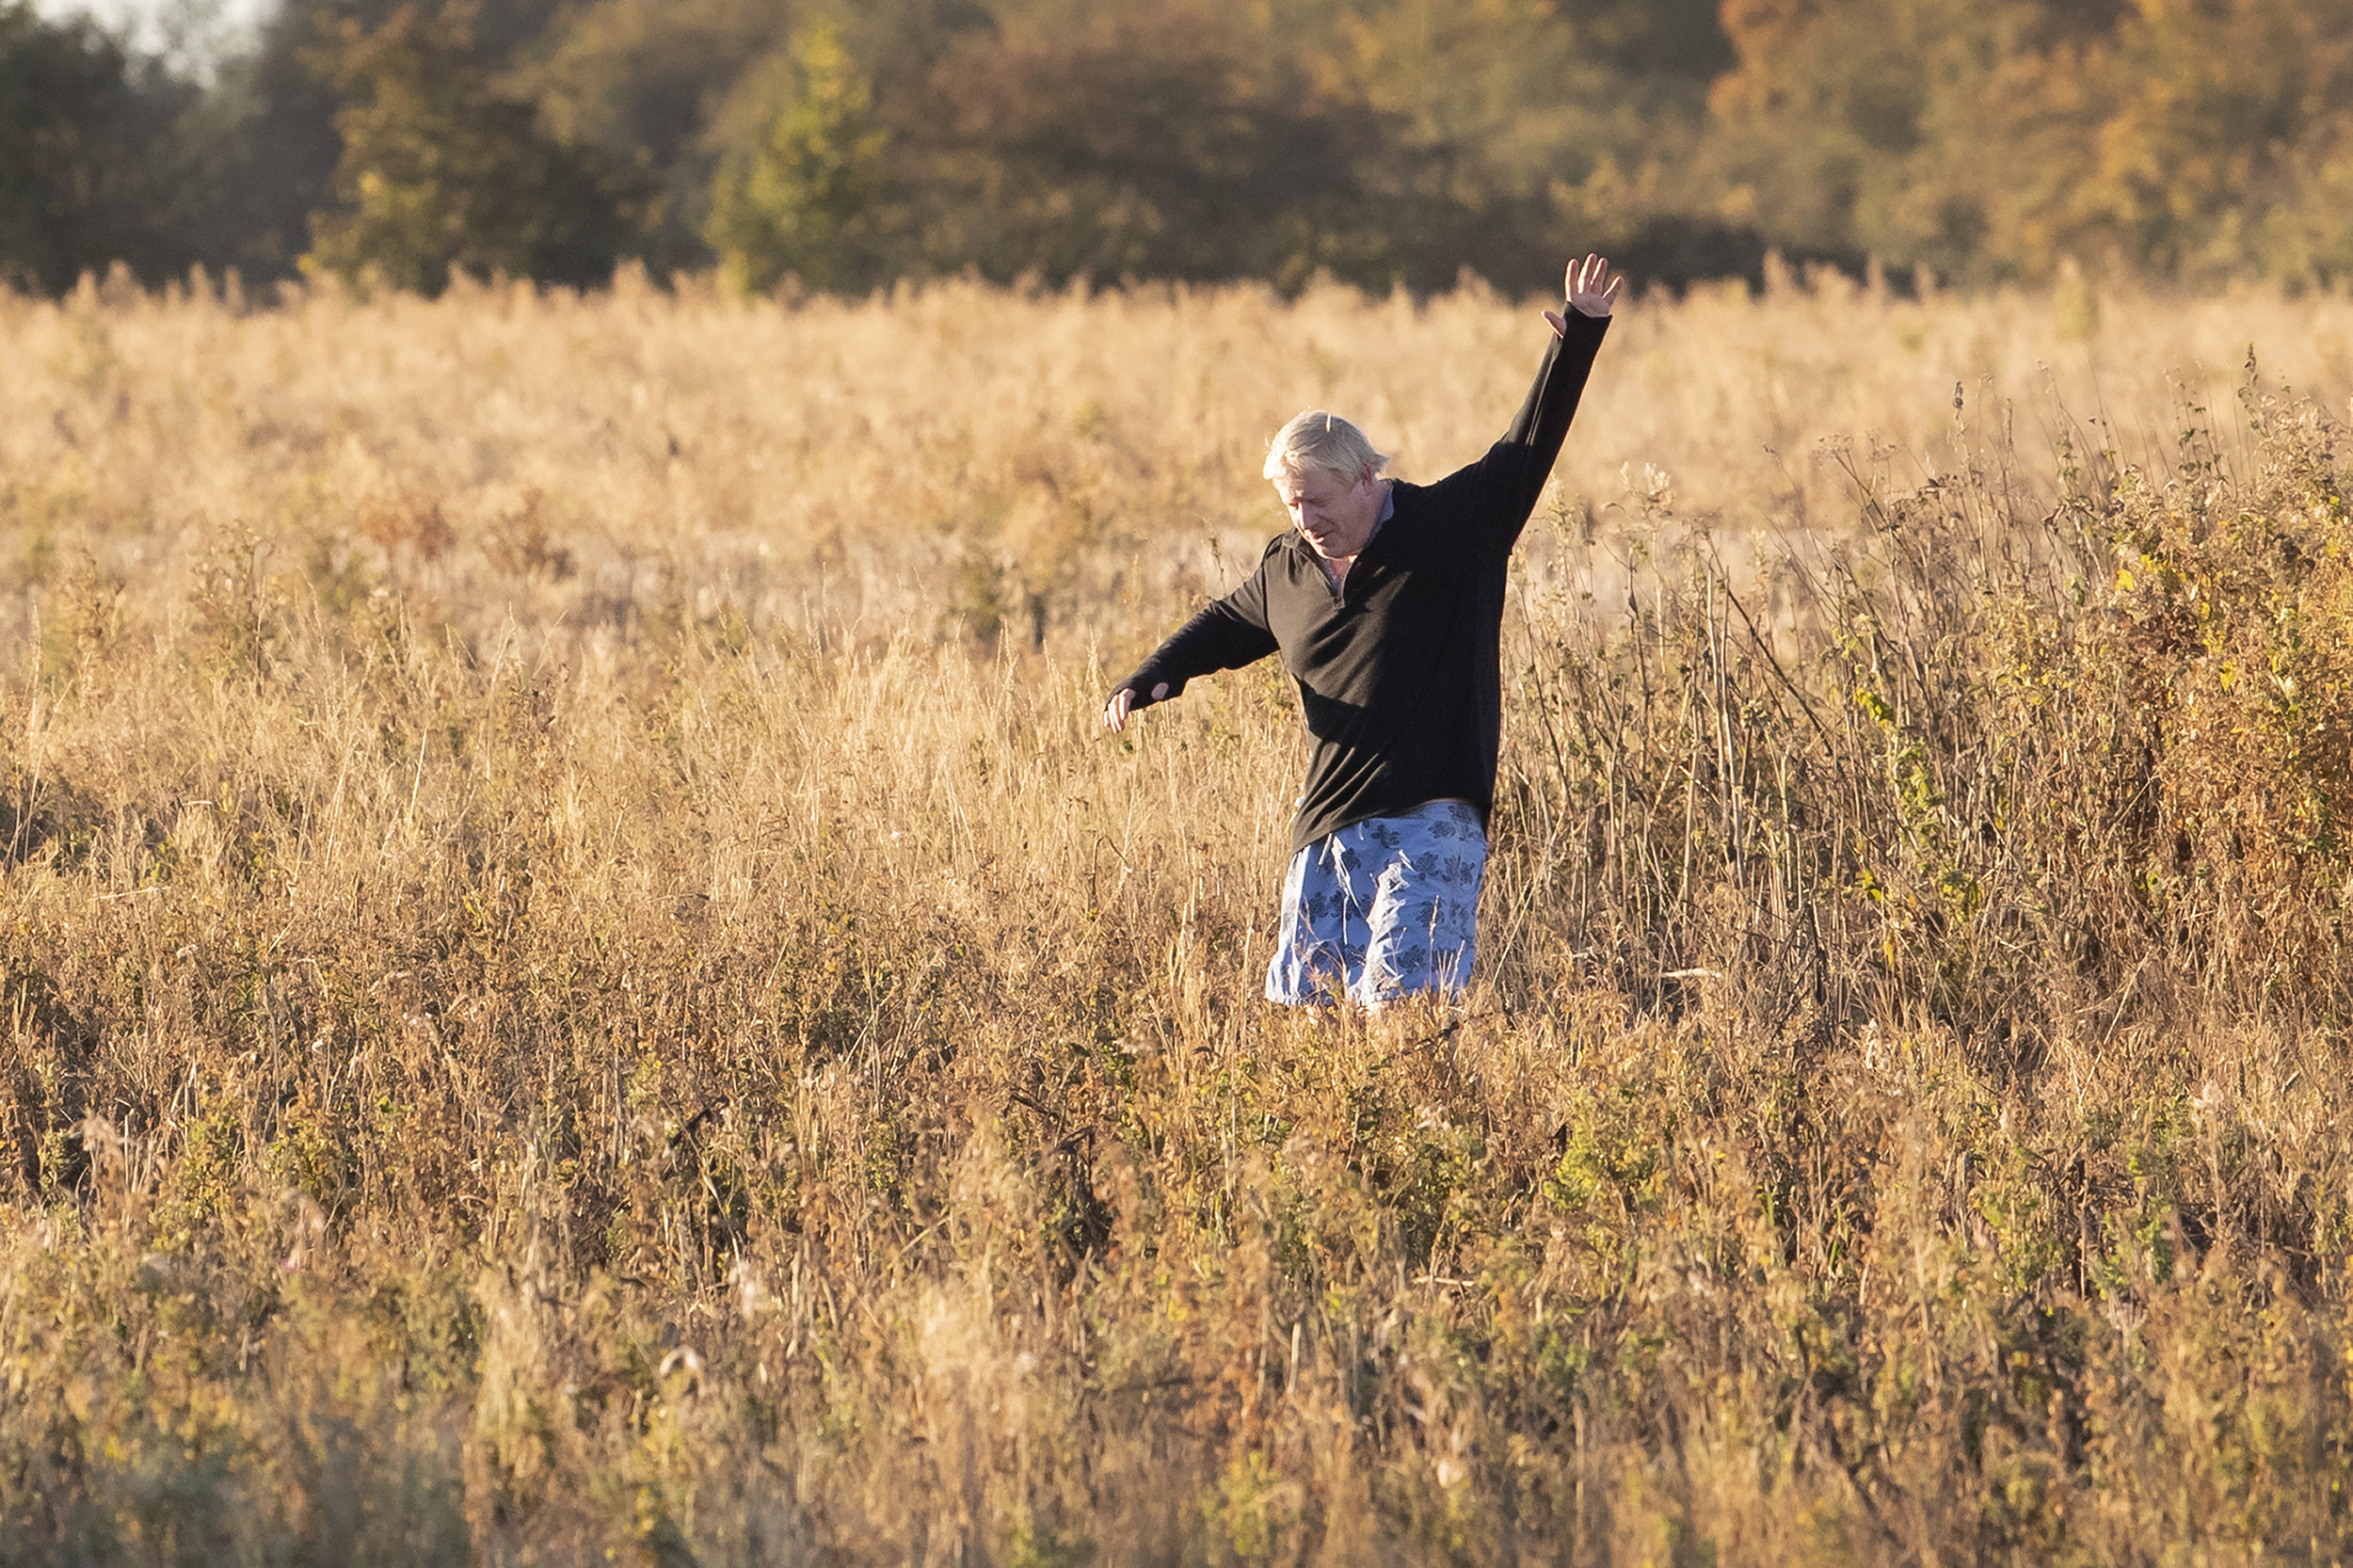  Boris Johnson waves as he runs in Thame, near his Oxfordshire home, just before he is due to attend Conservative Party Conference.
Photo by Peter Macdiarmid, 01 October 2018
 